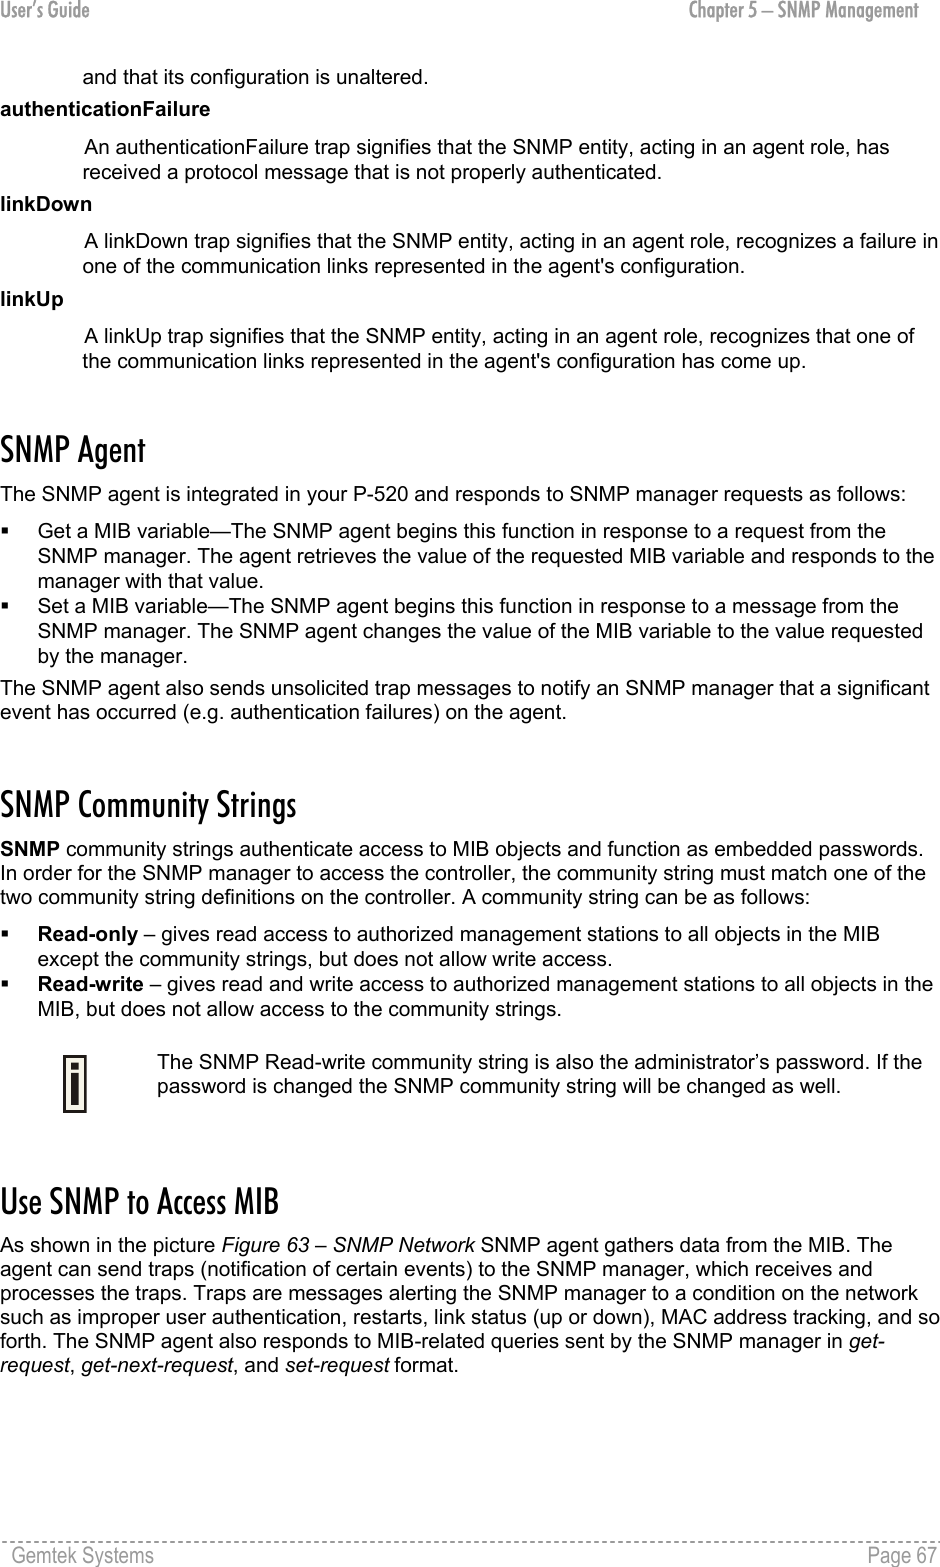 User’s Guide  Chapter 5 – SNMP Management and that its configuration is unaltered. authenticationFailure An authenticationFailure trap signifies that the SNMP entity, acting in an agent role, has received a protocol message that is not properly authenticated. linkDown A linkDown trap signifies that the SNMP entity, acting in an agent role, recognizes a failure in one of the communication links represented in the agent&apos;s configuration. linkUp A linkUp trap signifies that the SNMP entity, acting in an agent role, recognizes that one of the communication links represented in the agent&apos;s configuration has come up.  SNMP Agent The SNMP agent is integrated in your P-520 and responds to SNMP manager requests as follows:   Get a MIB variable—The SNMP agent begins this function in response to a request from the SNMP manager. The agent retrieves the value of the requested MIB variable and responds to the manager with that value.   Set a MIB variable—The SNMP agent begins this function in response to a message from the SNMP manager. The SNMP agent changes the value of the MIB variable to the value requested by the manager. The SNMP agent also sends unsolicited trap messages to notify an SNMP manager that a significant event has occurred (e.g. authentication failures) on the agent.  SNMP Community Strings SNMP community strings authenticate access to MIB objects and function as embedded passwords. In order for the SNMP manager to access the controller, the community string must match one of the two community string definitions on the controller. A community string can be as follows:   Read-only – gives read access to authorized management stations to all objects in the MIB except the community strings, but does not allow write access.    Read-write – gives read and write access to authorized management stations to all objects in the MIB, but does not allow access to the community strings.   The SNMP Read-write community string is also the administrator’s password. If the password is changed the SNMP community string will be changed as well.  Use SNMP to Access MIB As shown in the picture Figure 63 – SNMP Network SNMP agent gathers data from the MIB. The agent can send traps (notification of certain events) to the SNMP manager, which receives and processes the traps. Traps are messages alerting the SNMP manager to a condition on the network such as improper user authentication, restarts, link status (up or down), MAC address tracking, and so forth. The SNMP agent also responds to MIB-related queries sent by the SNMP manager in get-request, get-next-request, and set-request format.  Gemtek Systems    Page 67  